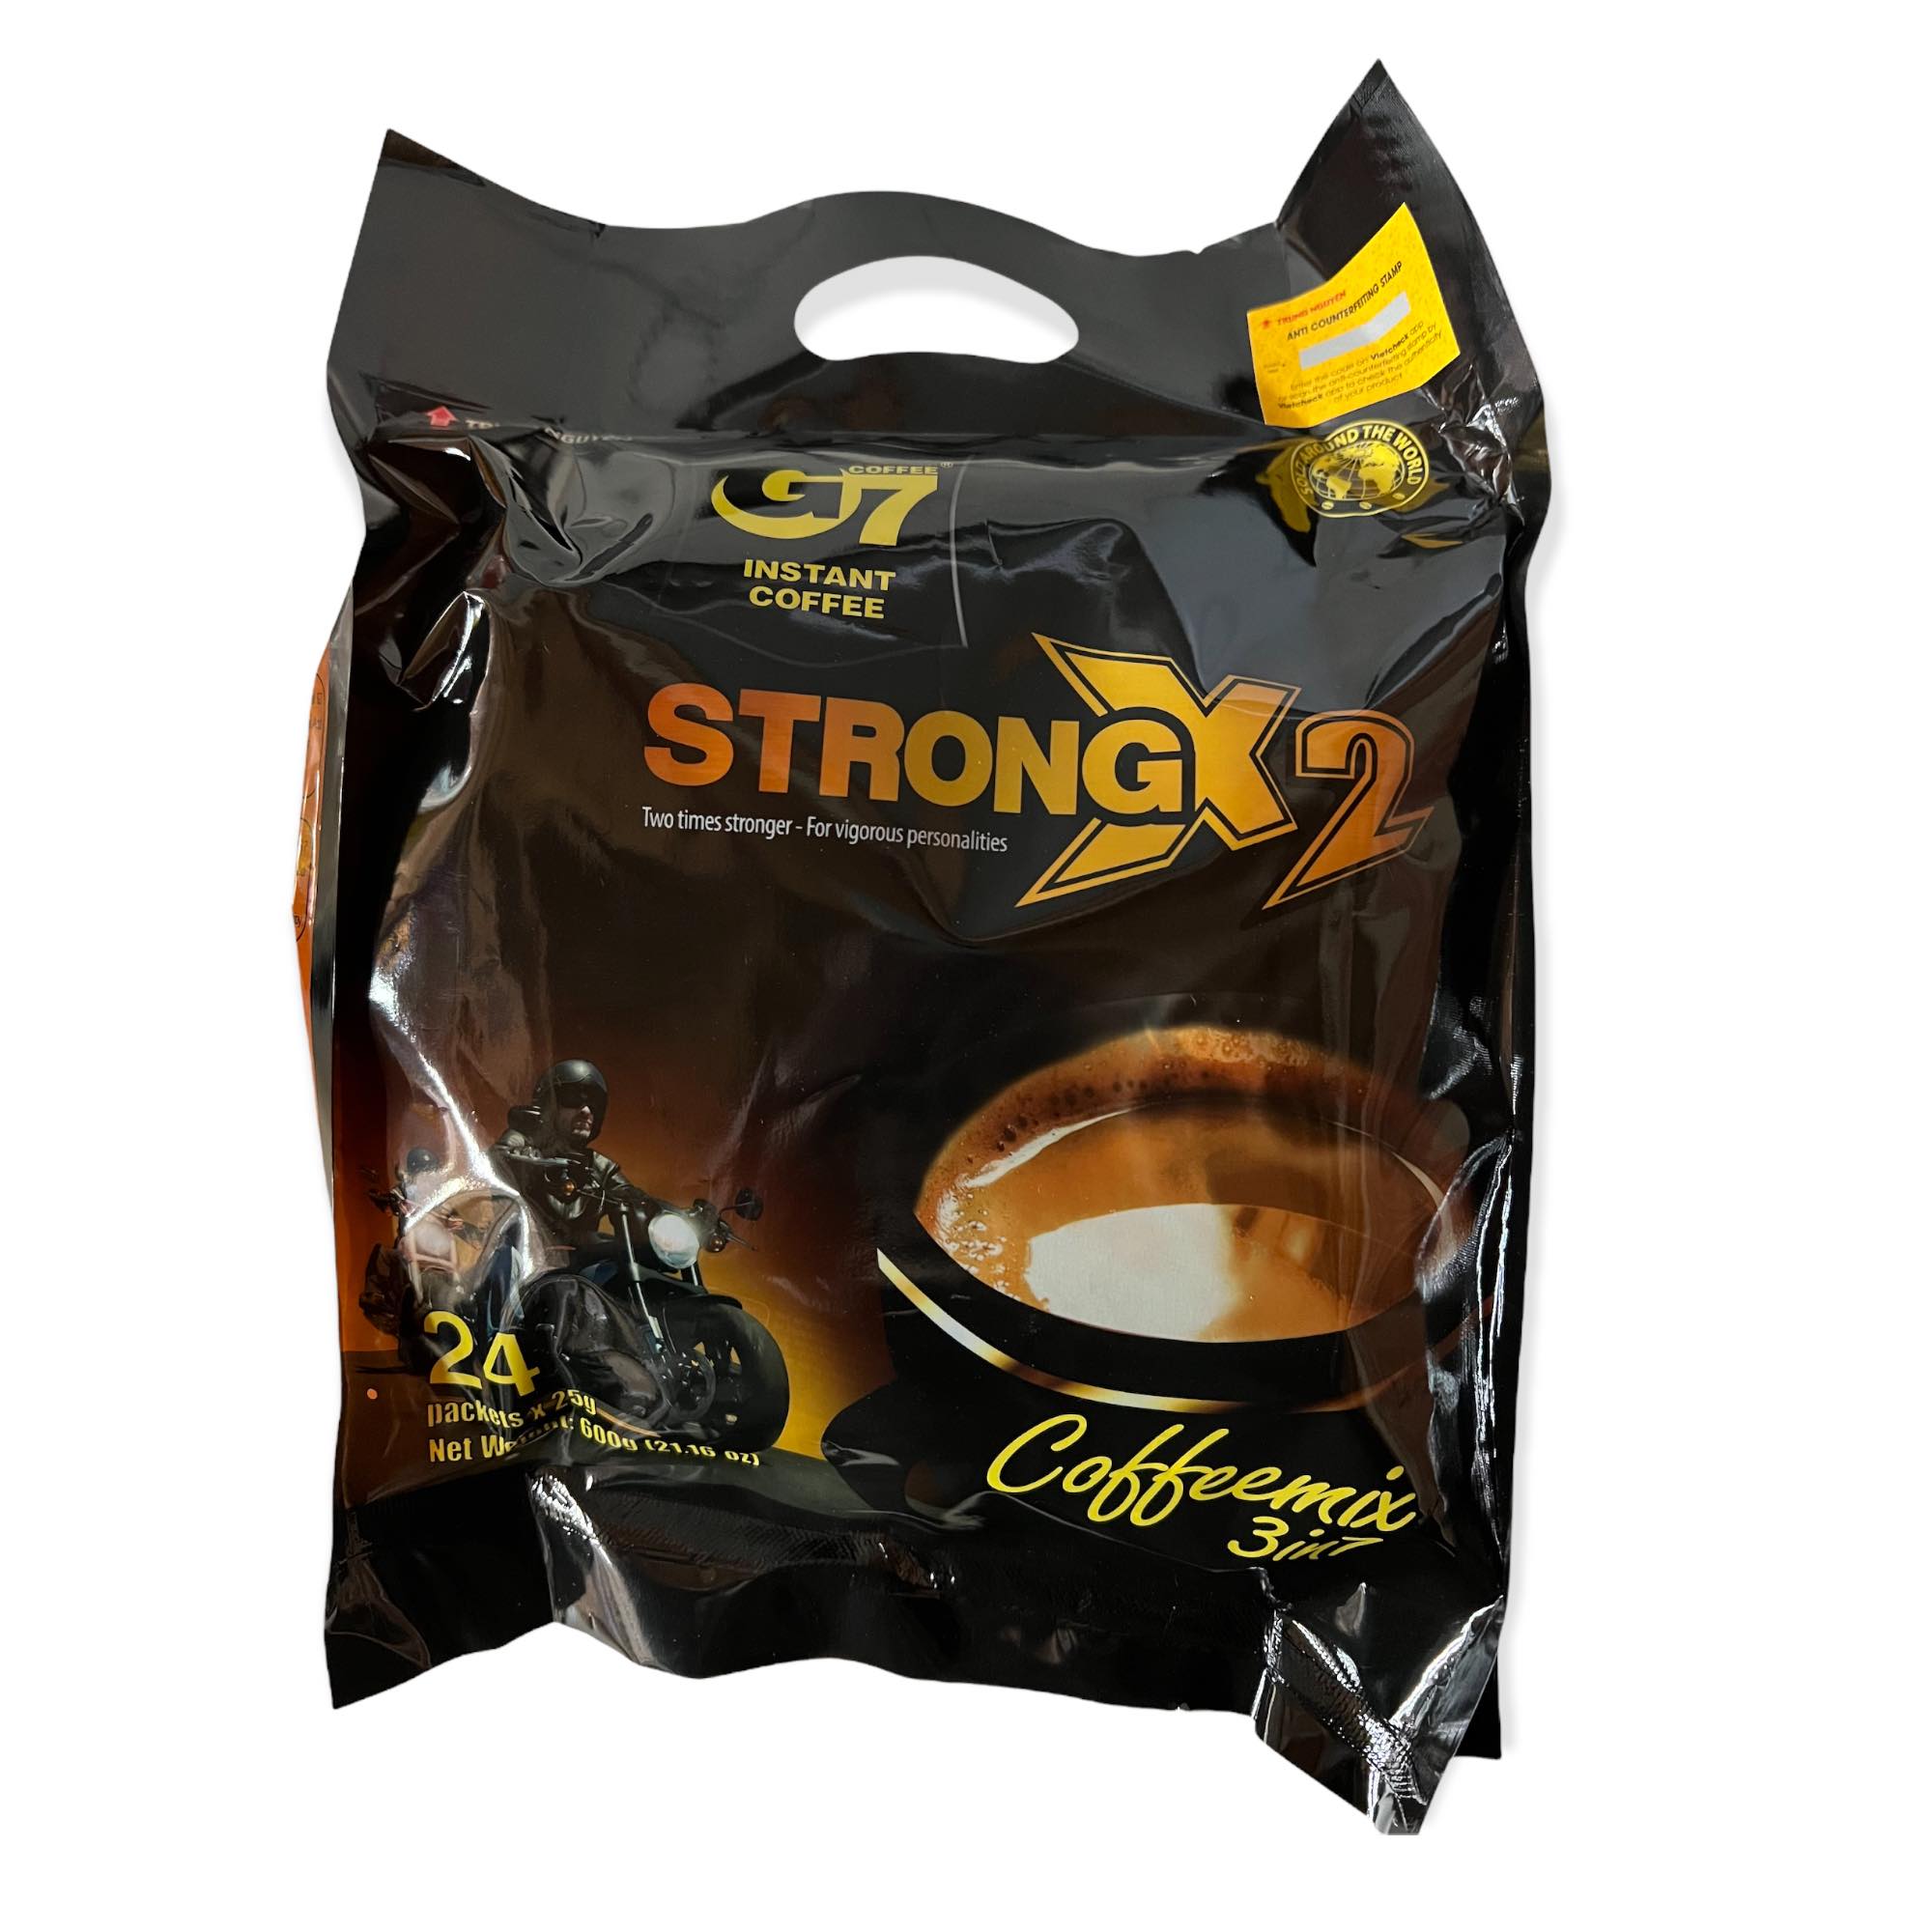 G7 - 3 in 1 Instant Coffee Mix - Strong X2 - 24 Sachets - 600 G